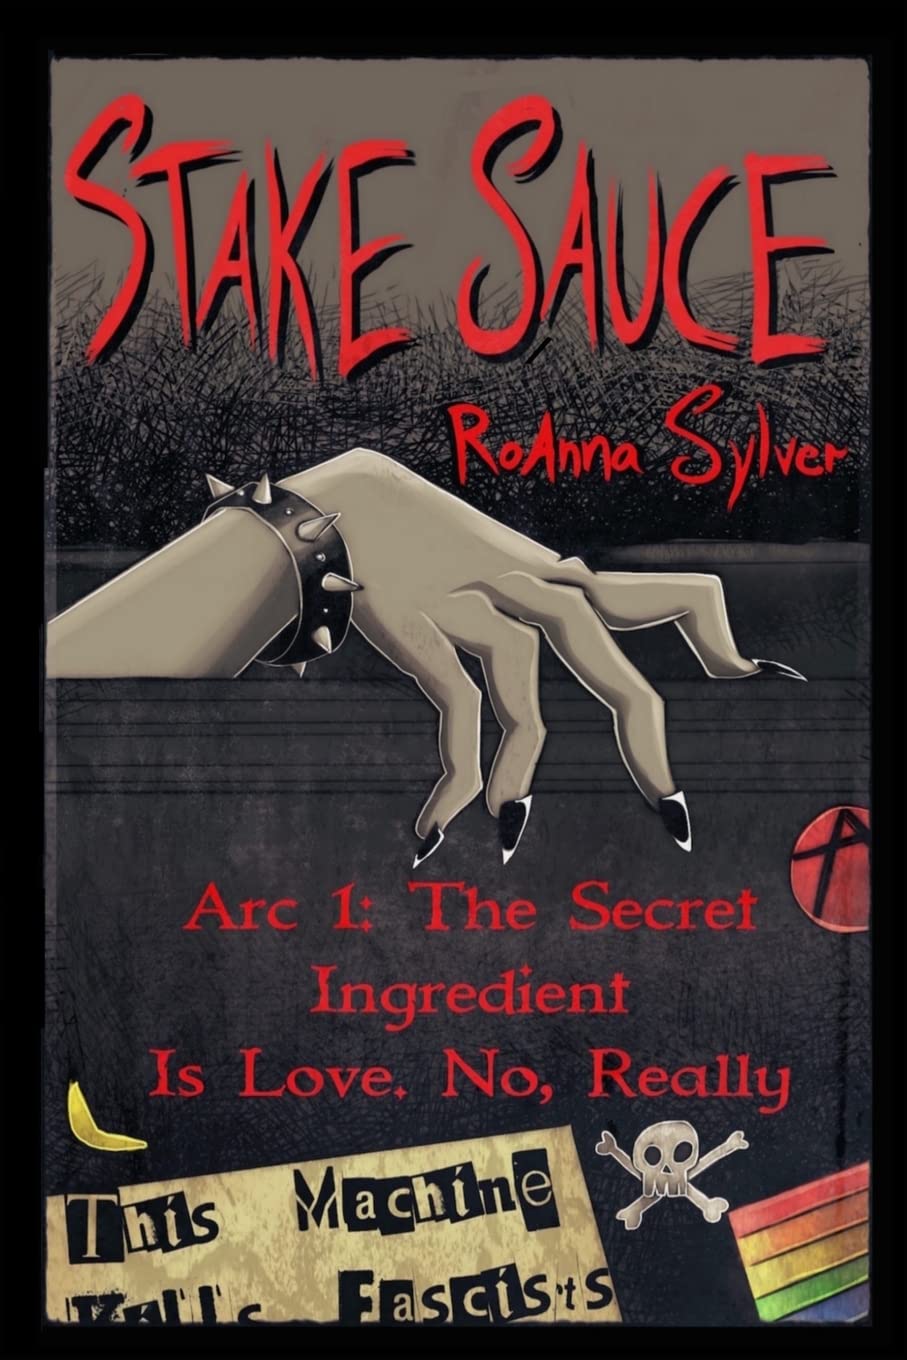 RoAnna Sylver: Stake Sauce (Paperback, 2017, The Kraken Collective, Createspace Independent Publishing Platform, CreateSpace Independent Publishing Platform)